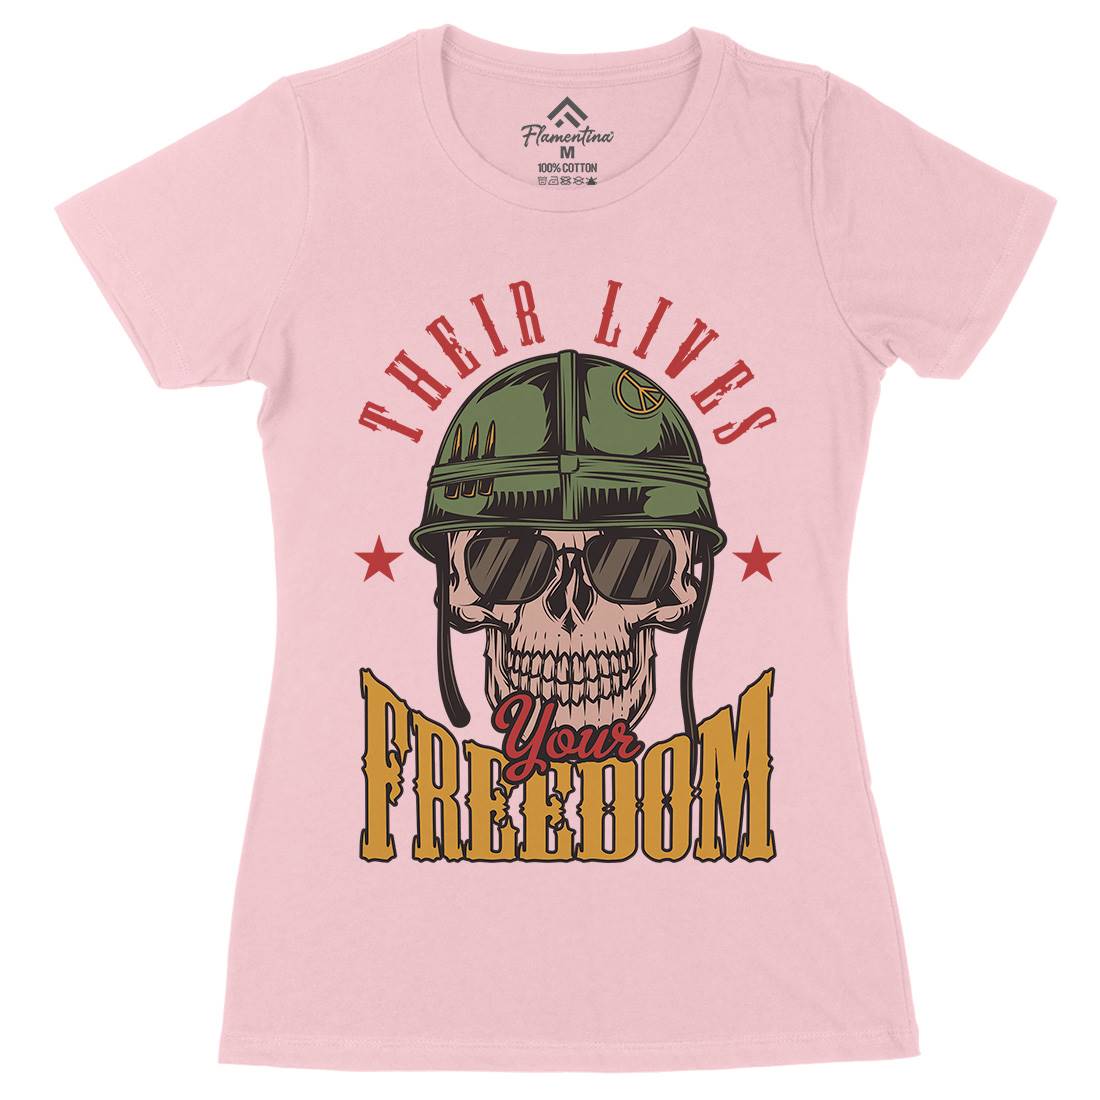 Your Freedom Womens Organic Crew Neck T-Shirt Army C899